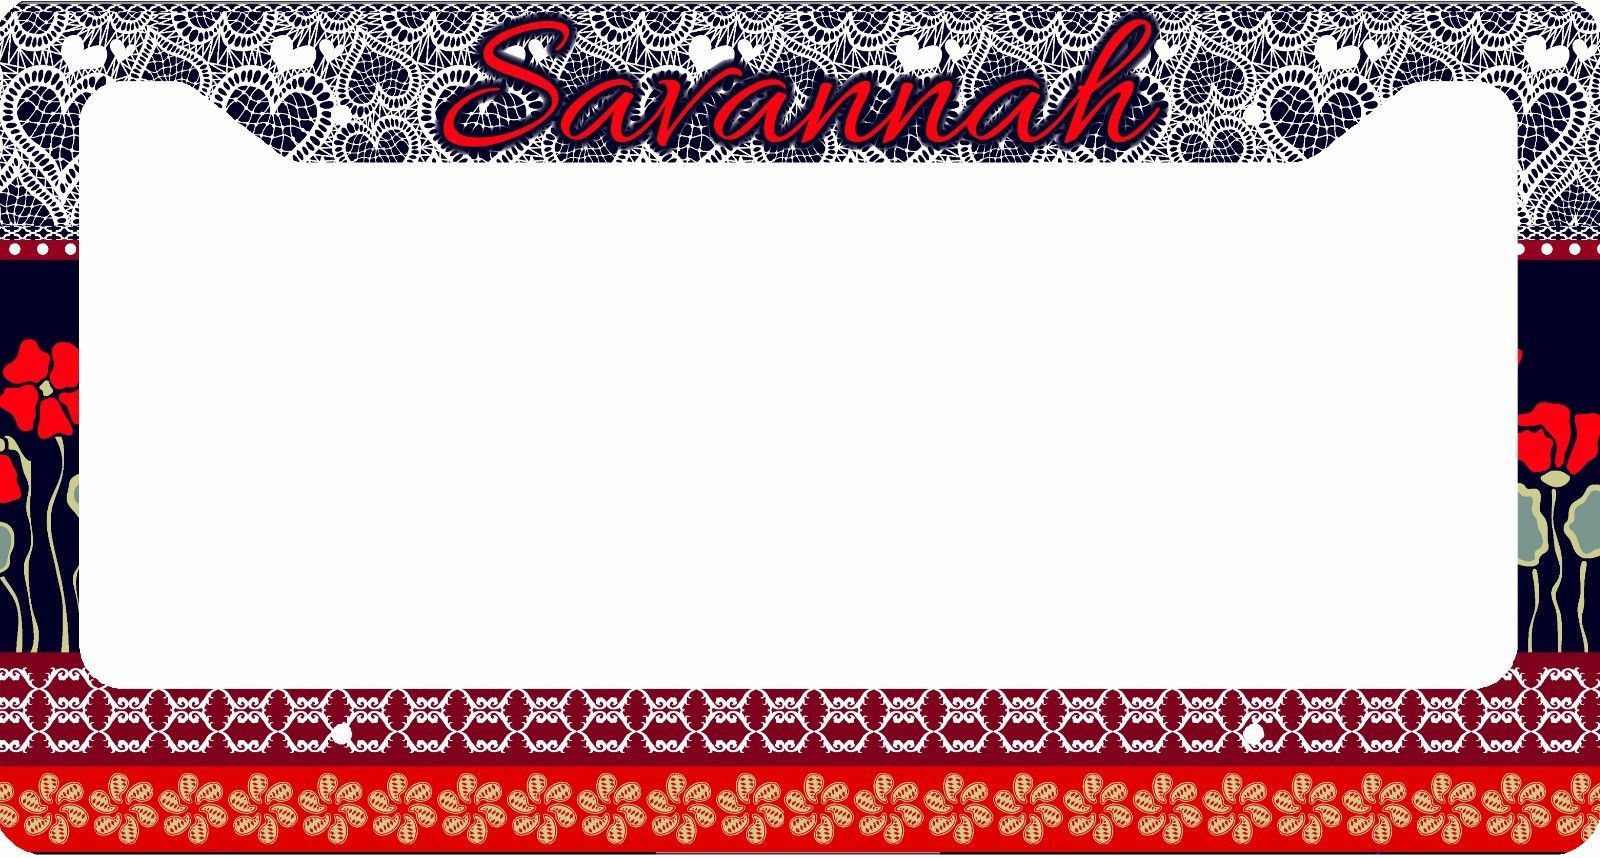 PERSONALIZED LICENSE PLATE FRAME CUSTOM CAR TAG NAVY RED POPPIES LACE - $14.68